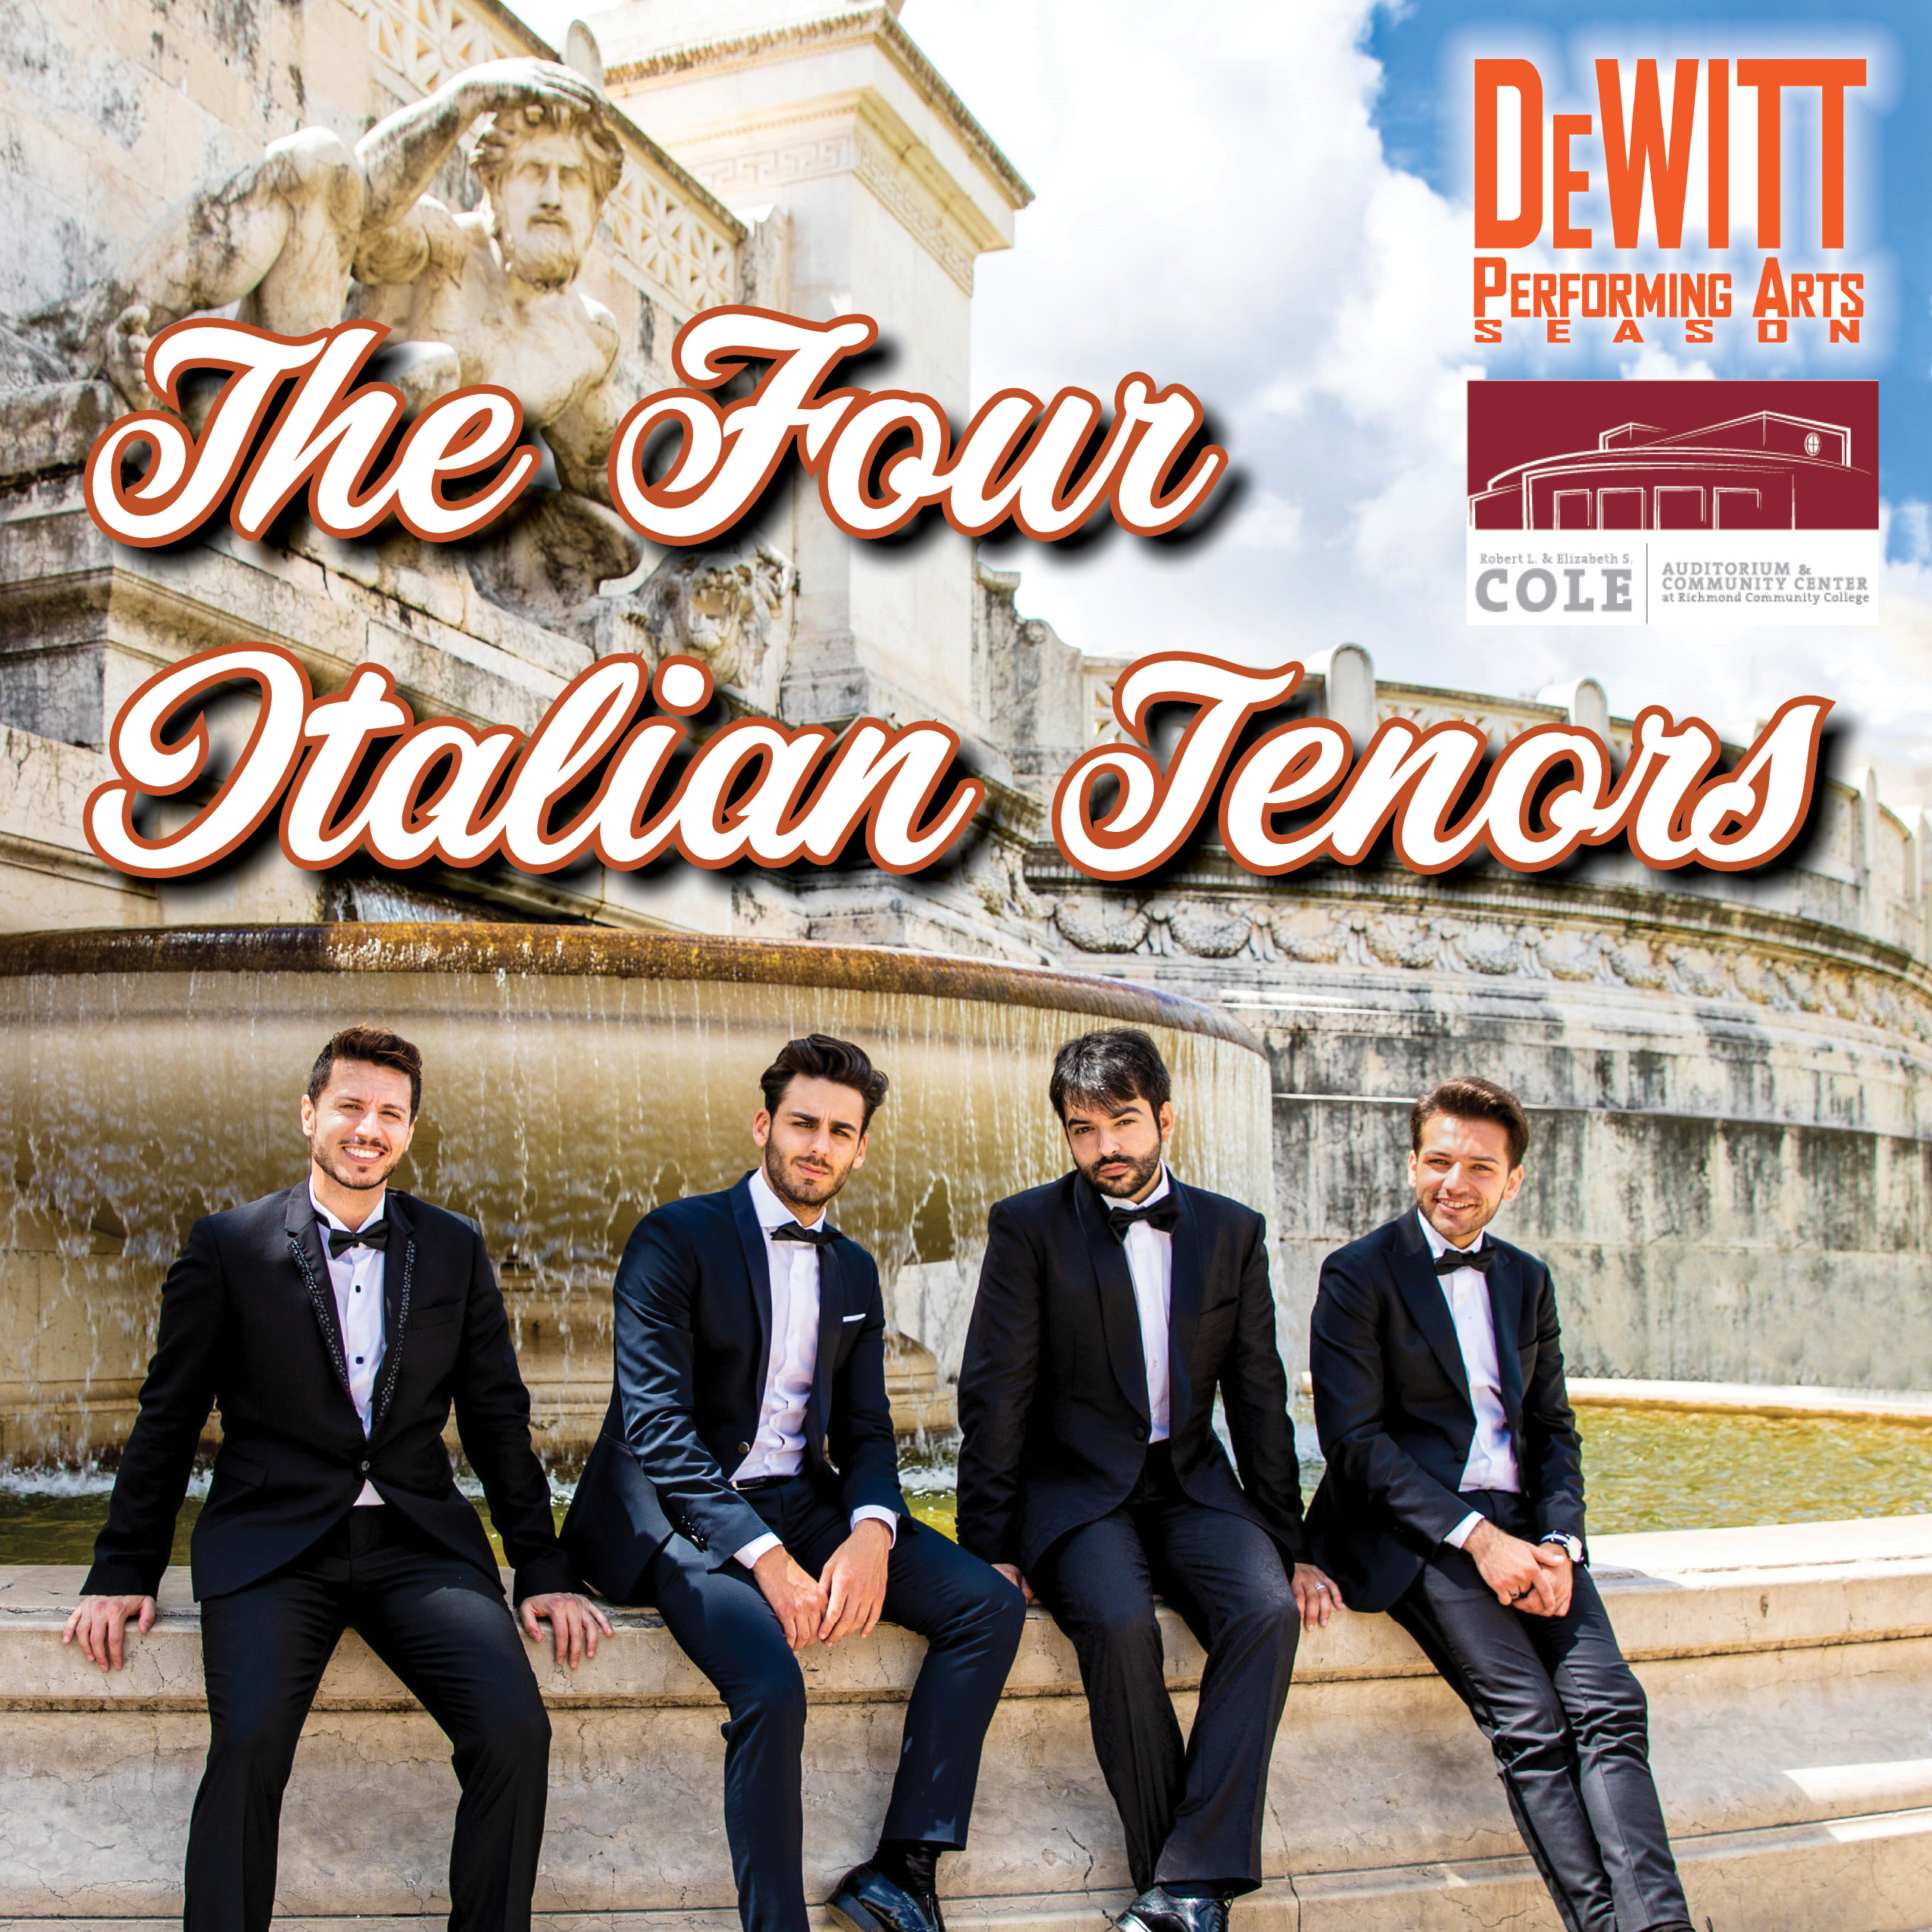 The Four Italian Tenors show promo for Oct. 1